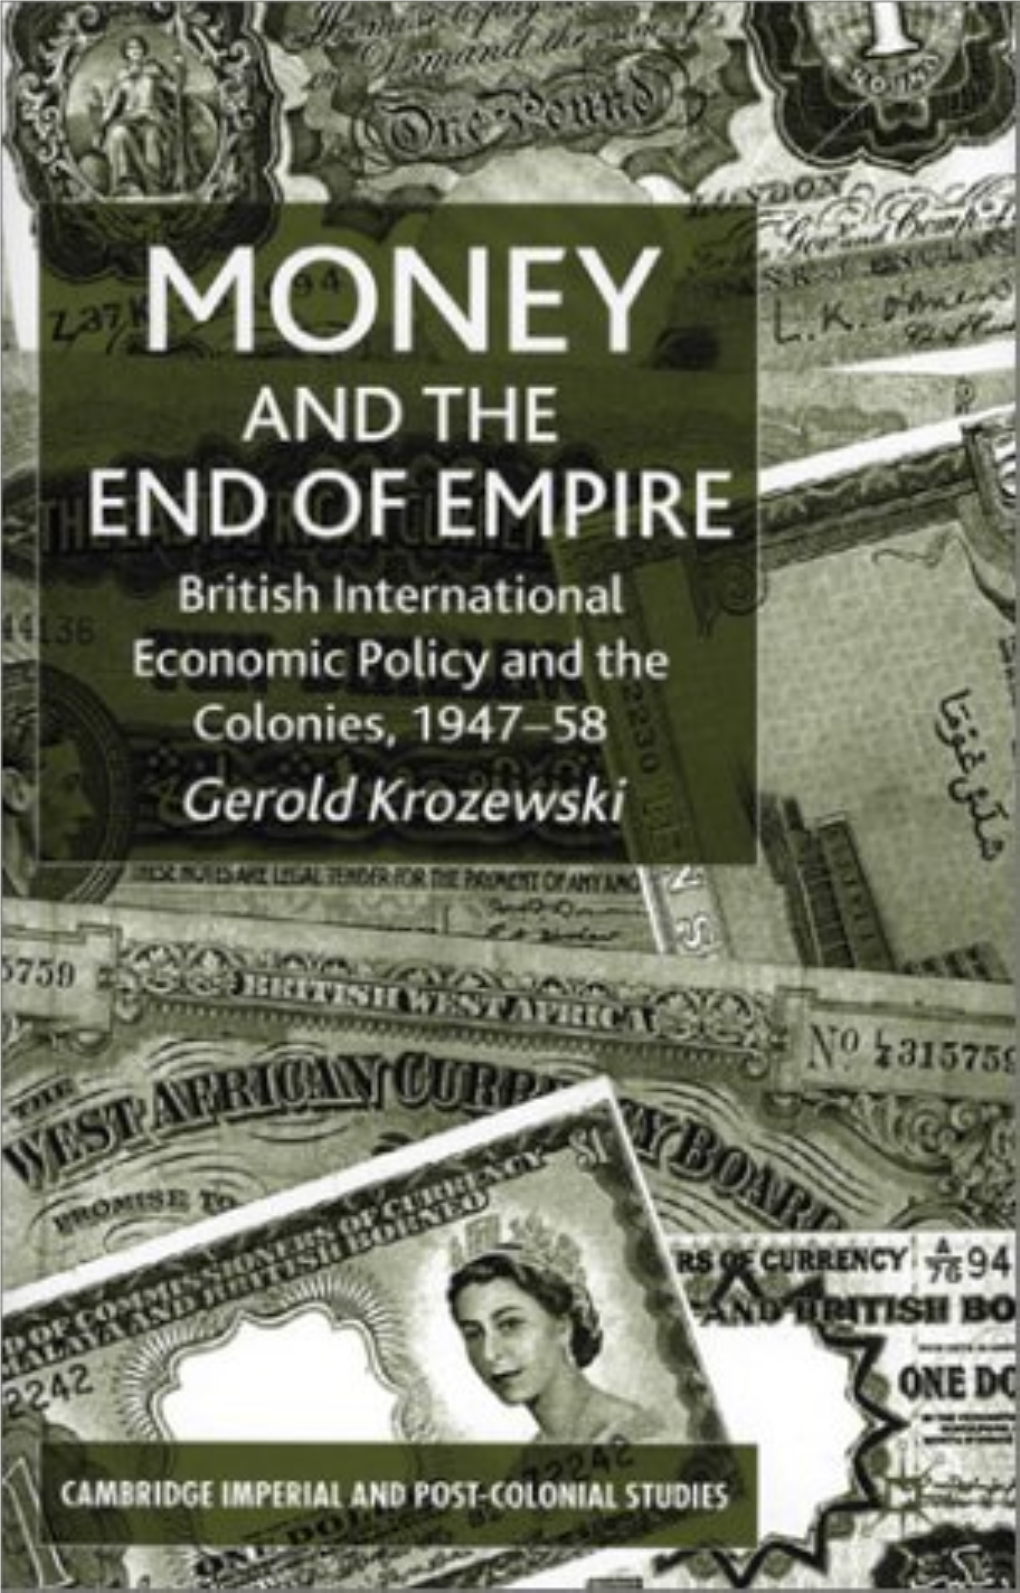 Money and the End of Empire: British International Economic Policy and the Colonies, 1947-58 (Cambridge Imperial and Post-Coloni